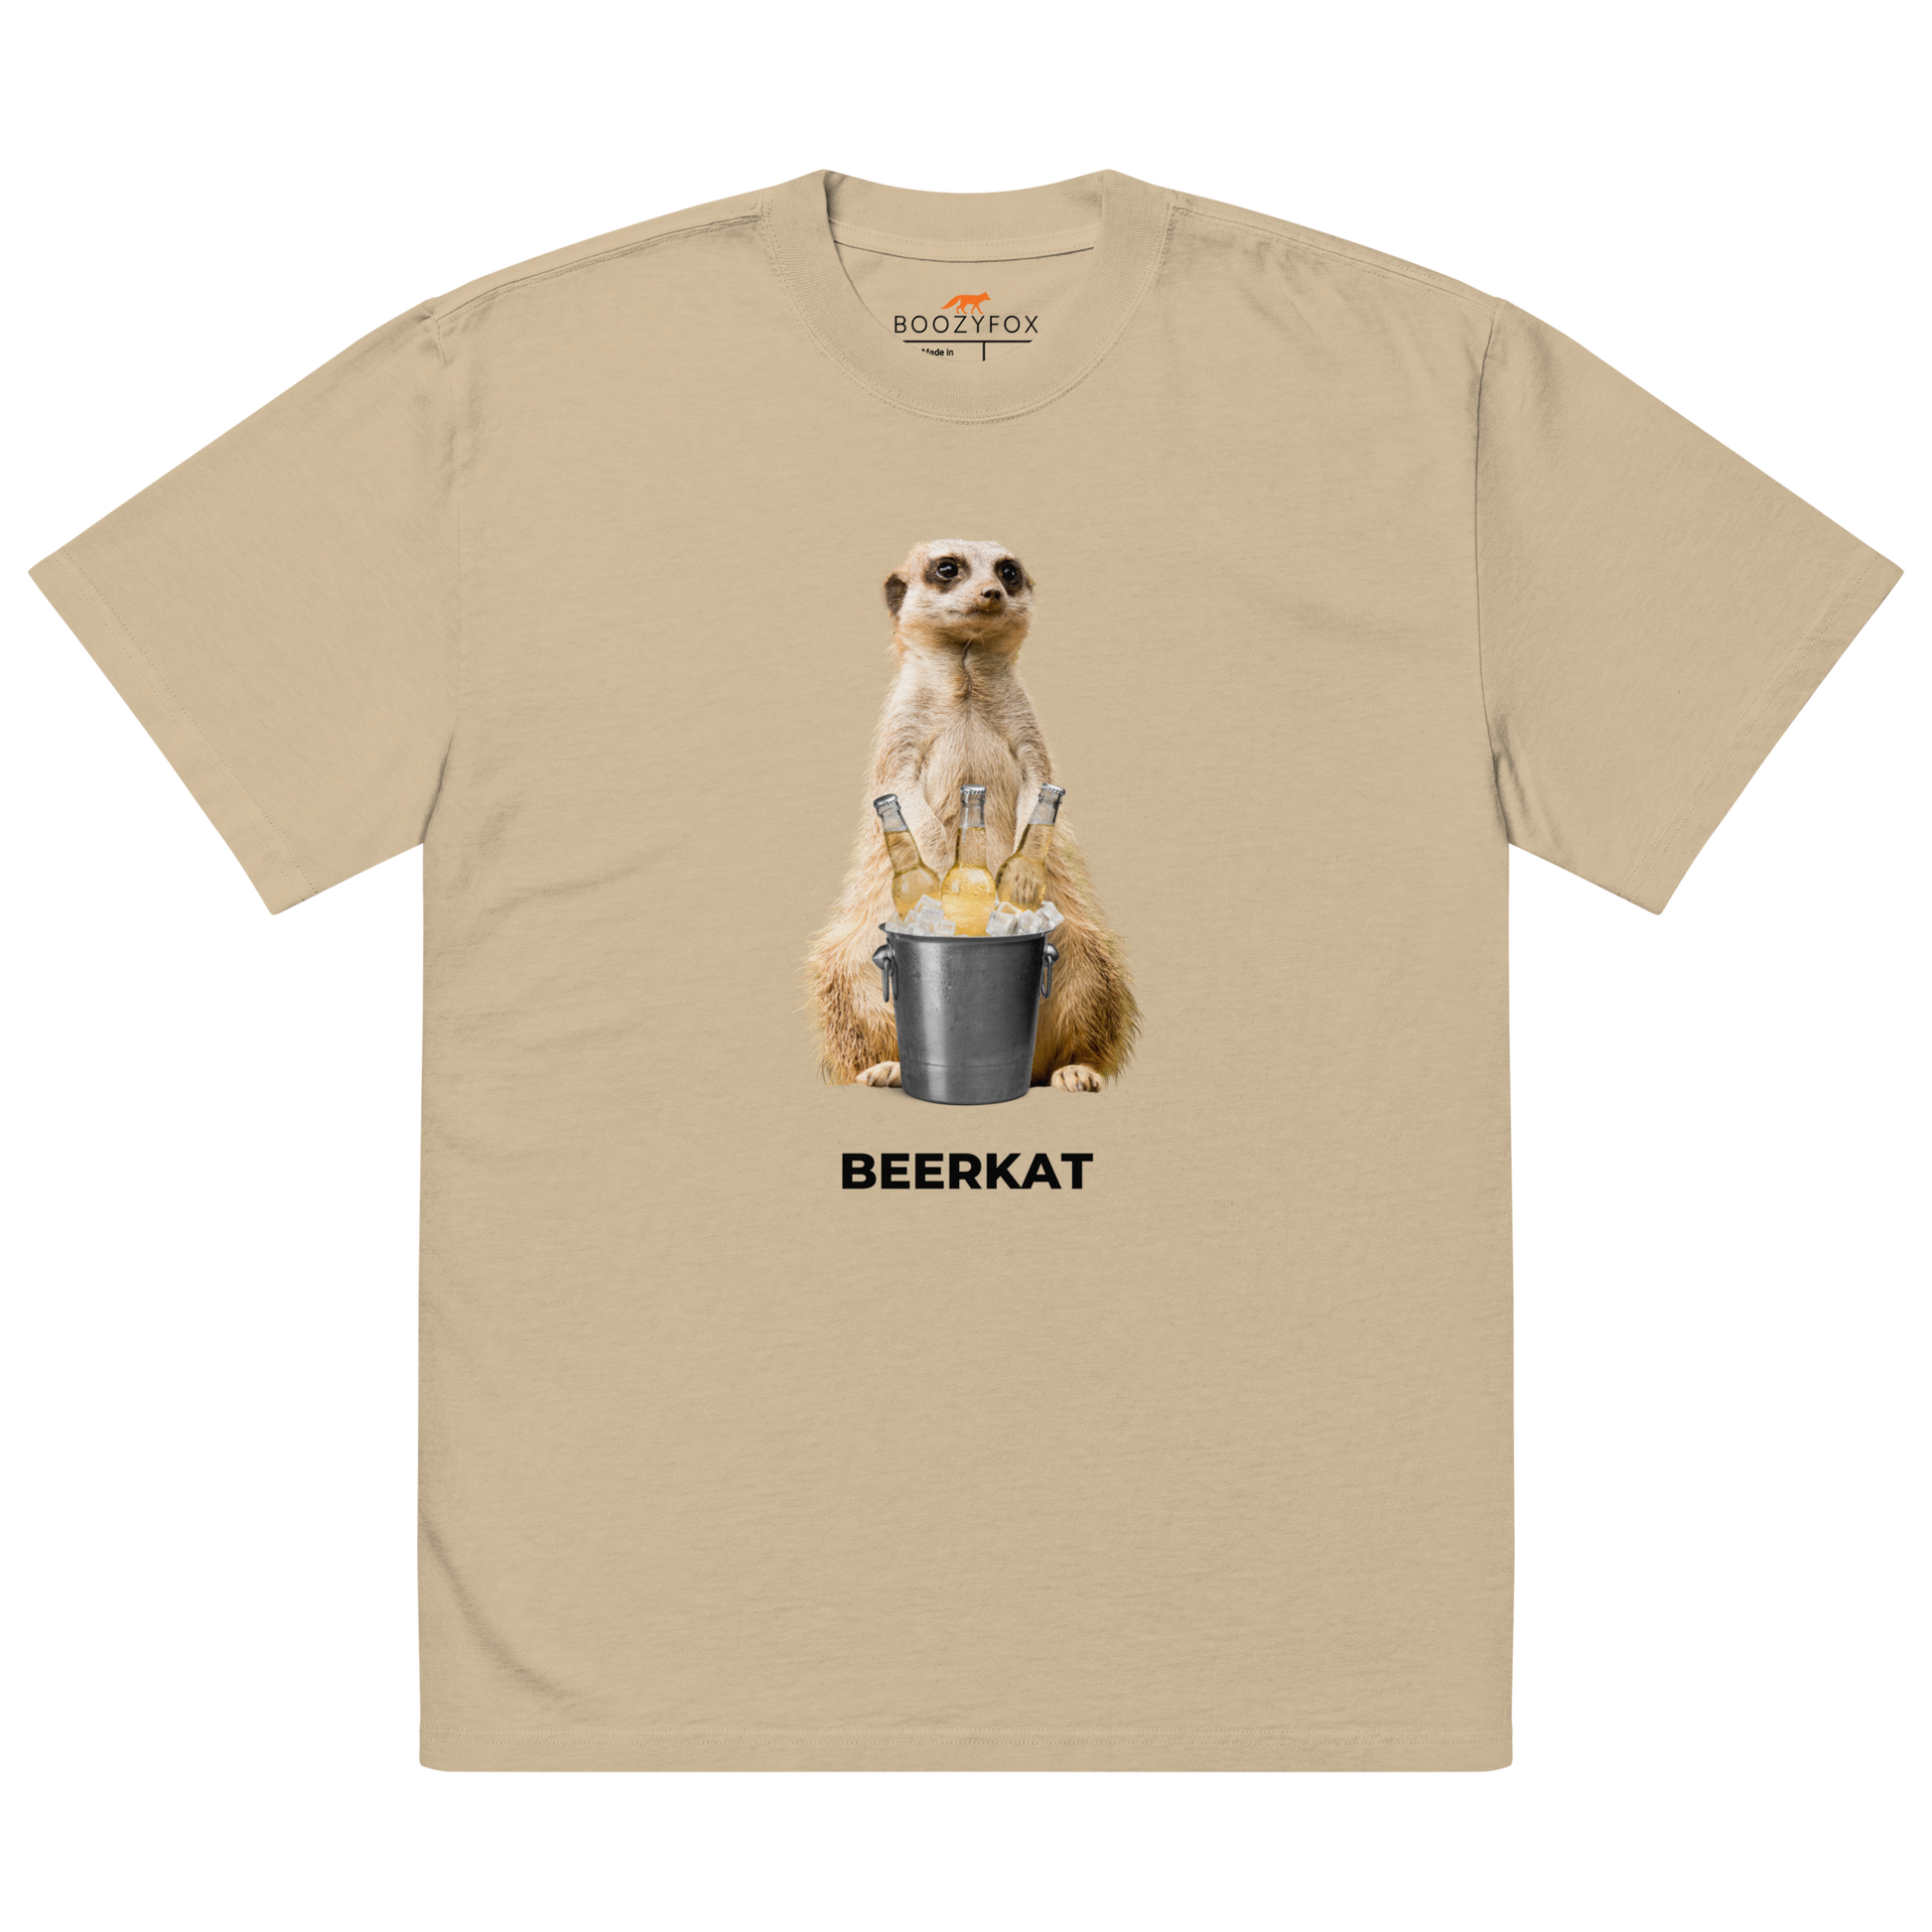 Faded Khaki Meerkat Oversized T-Shirt featuring a hilarious Beerkat graphic on the chest - Funny Graphic Meerkat Oversized Tees - Boozy Fox